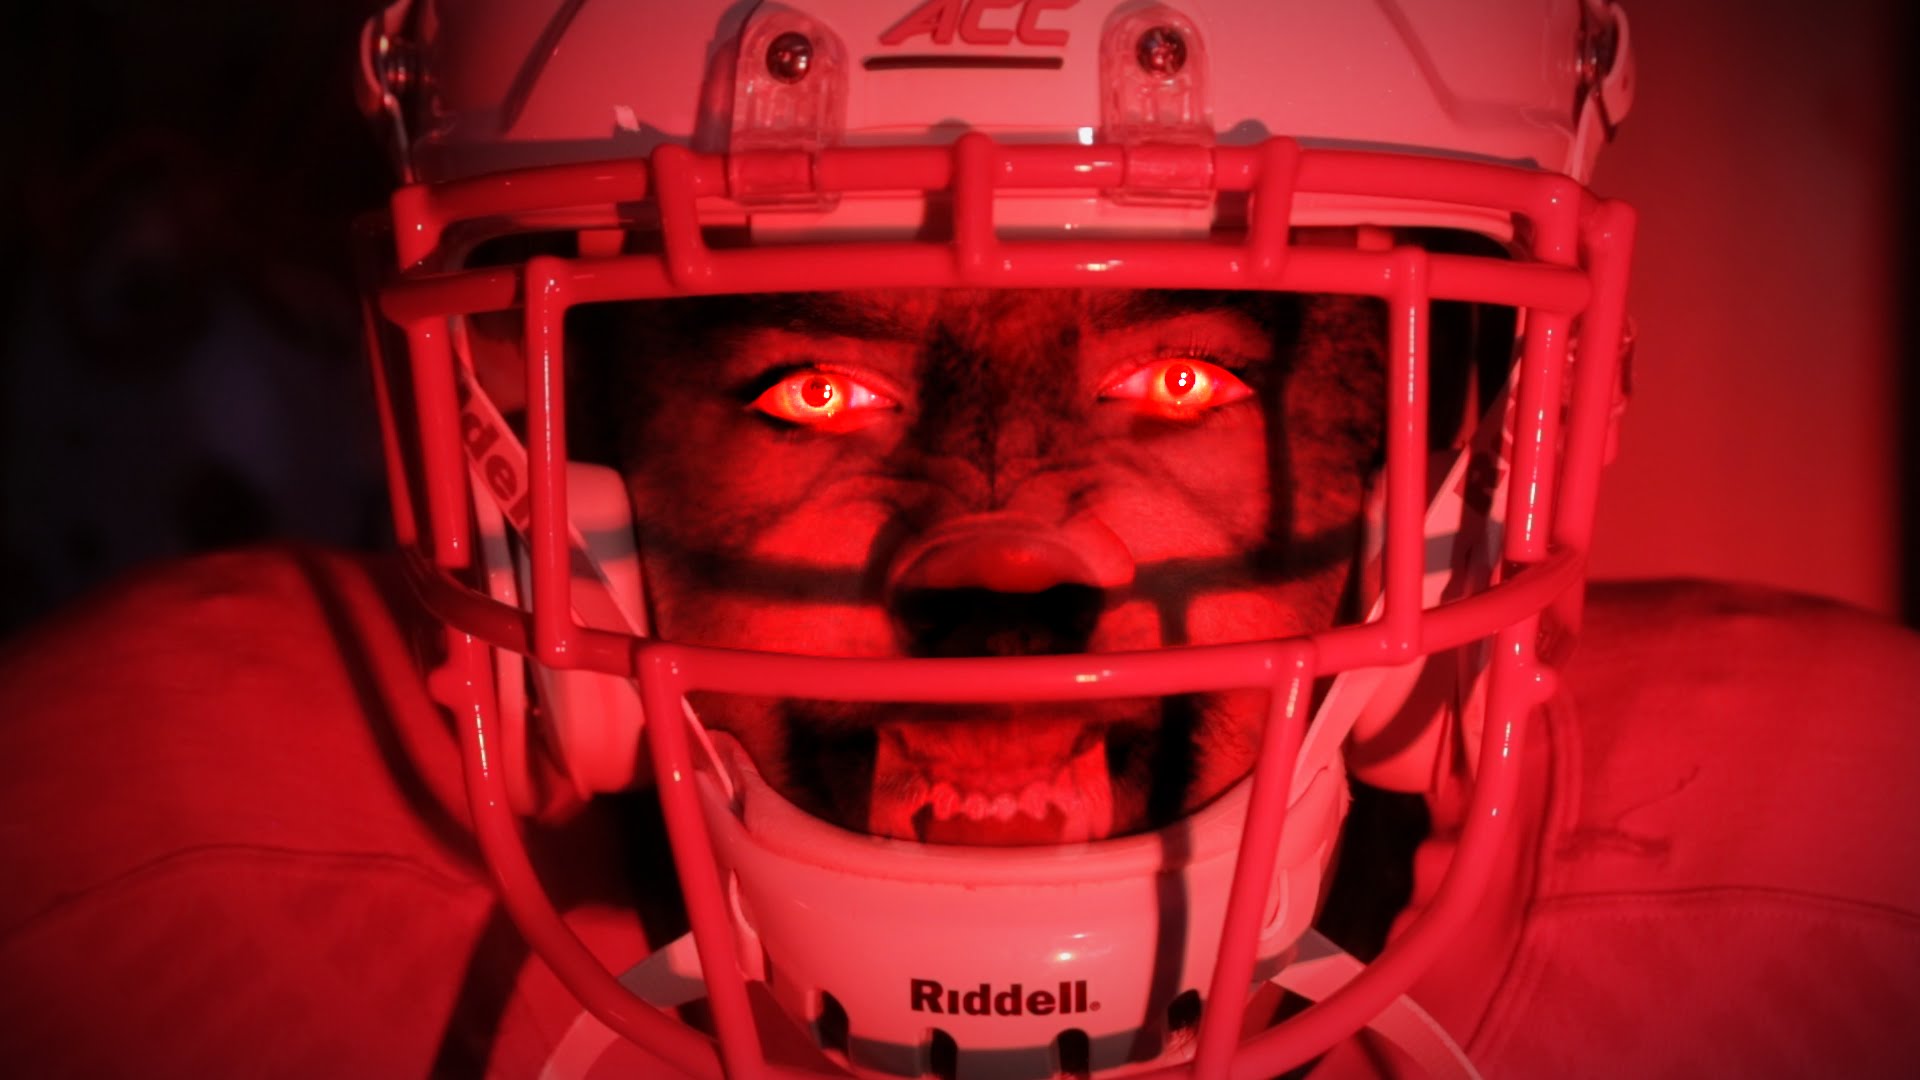 NC State Football intro video 2015 - YouTube